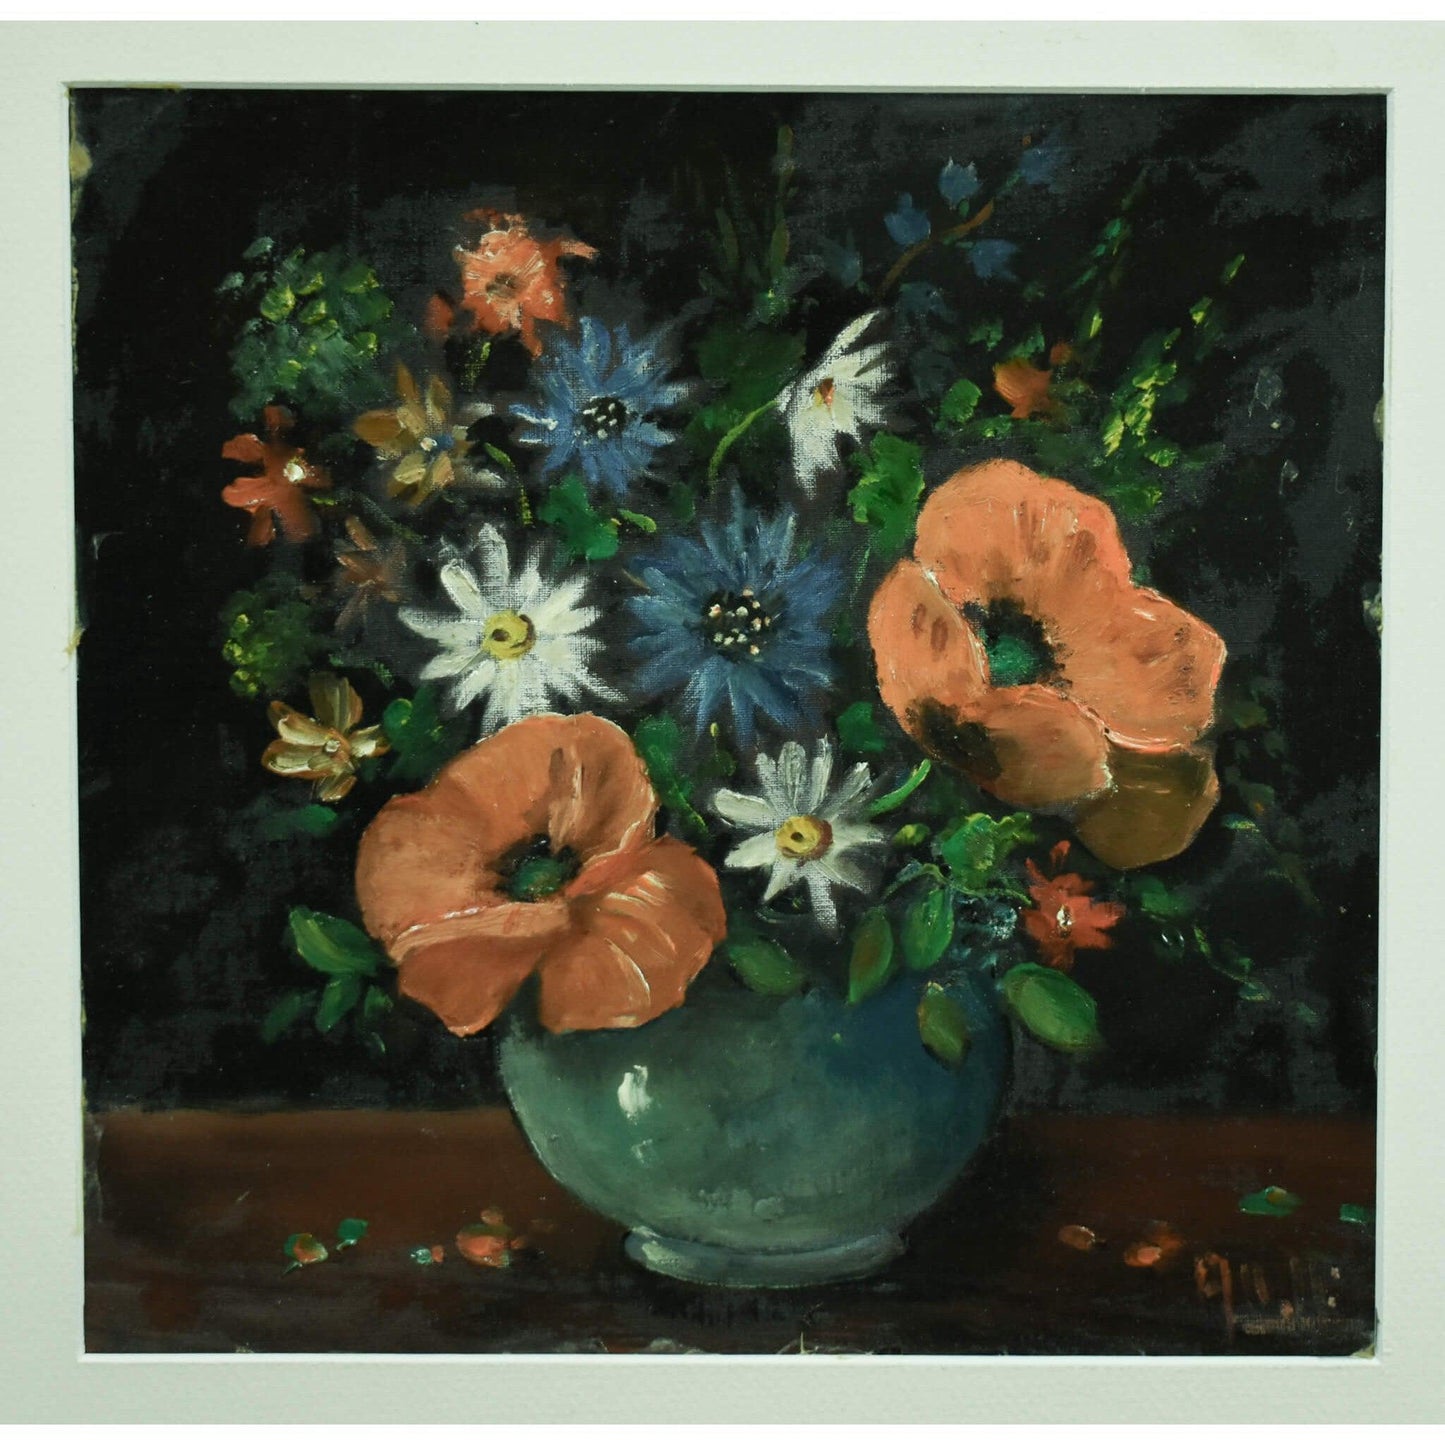 Vintage oil painting still life, poppies and daisies in a vase, circa 1950, for sale at Winckelmann Gallery